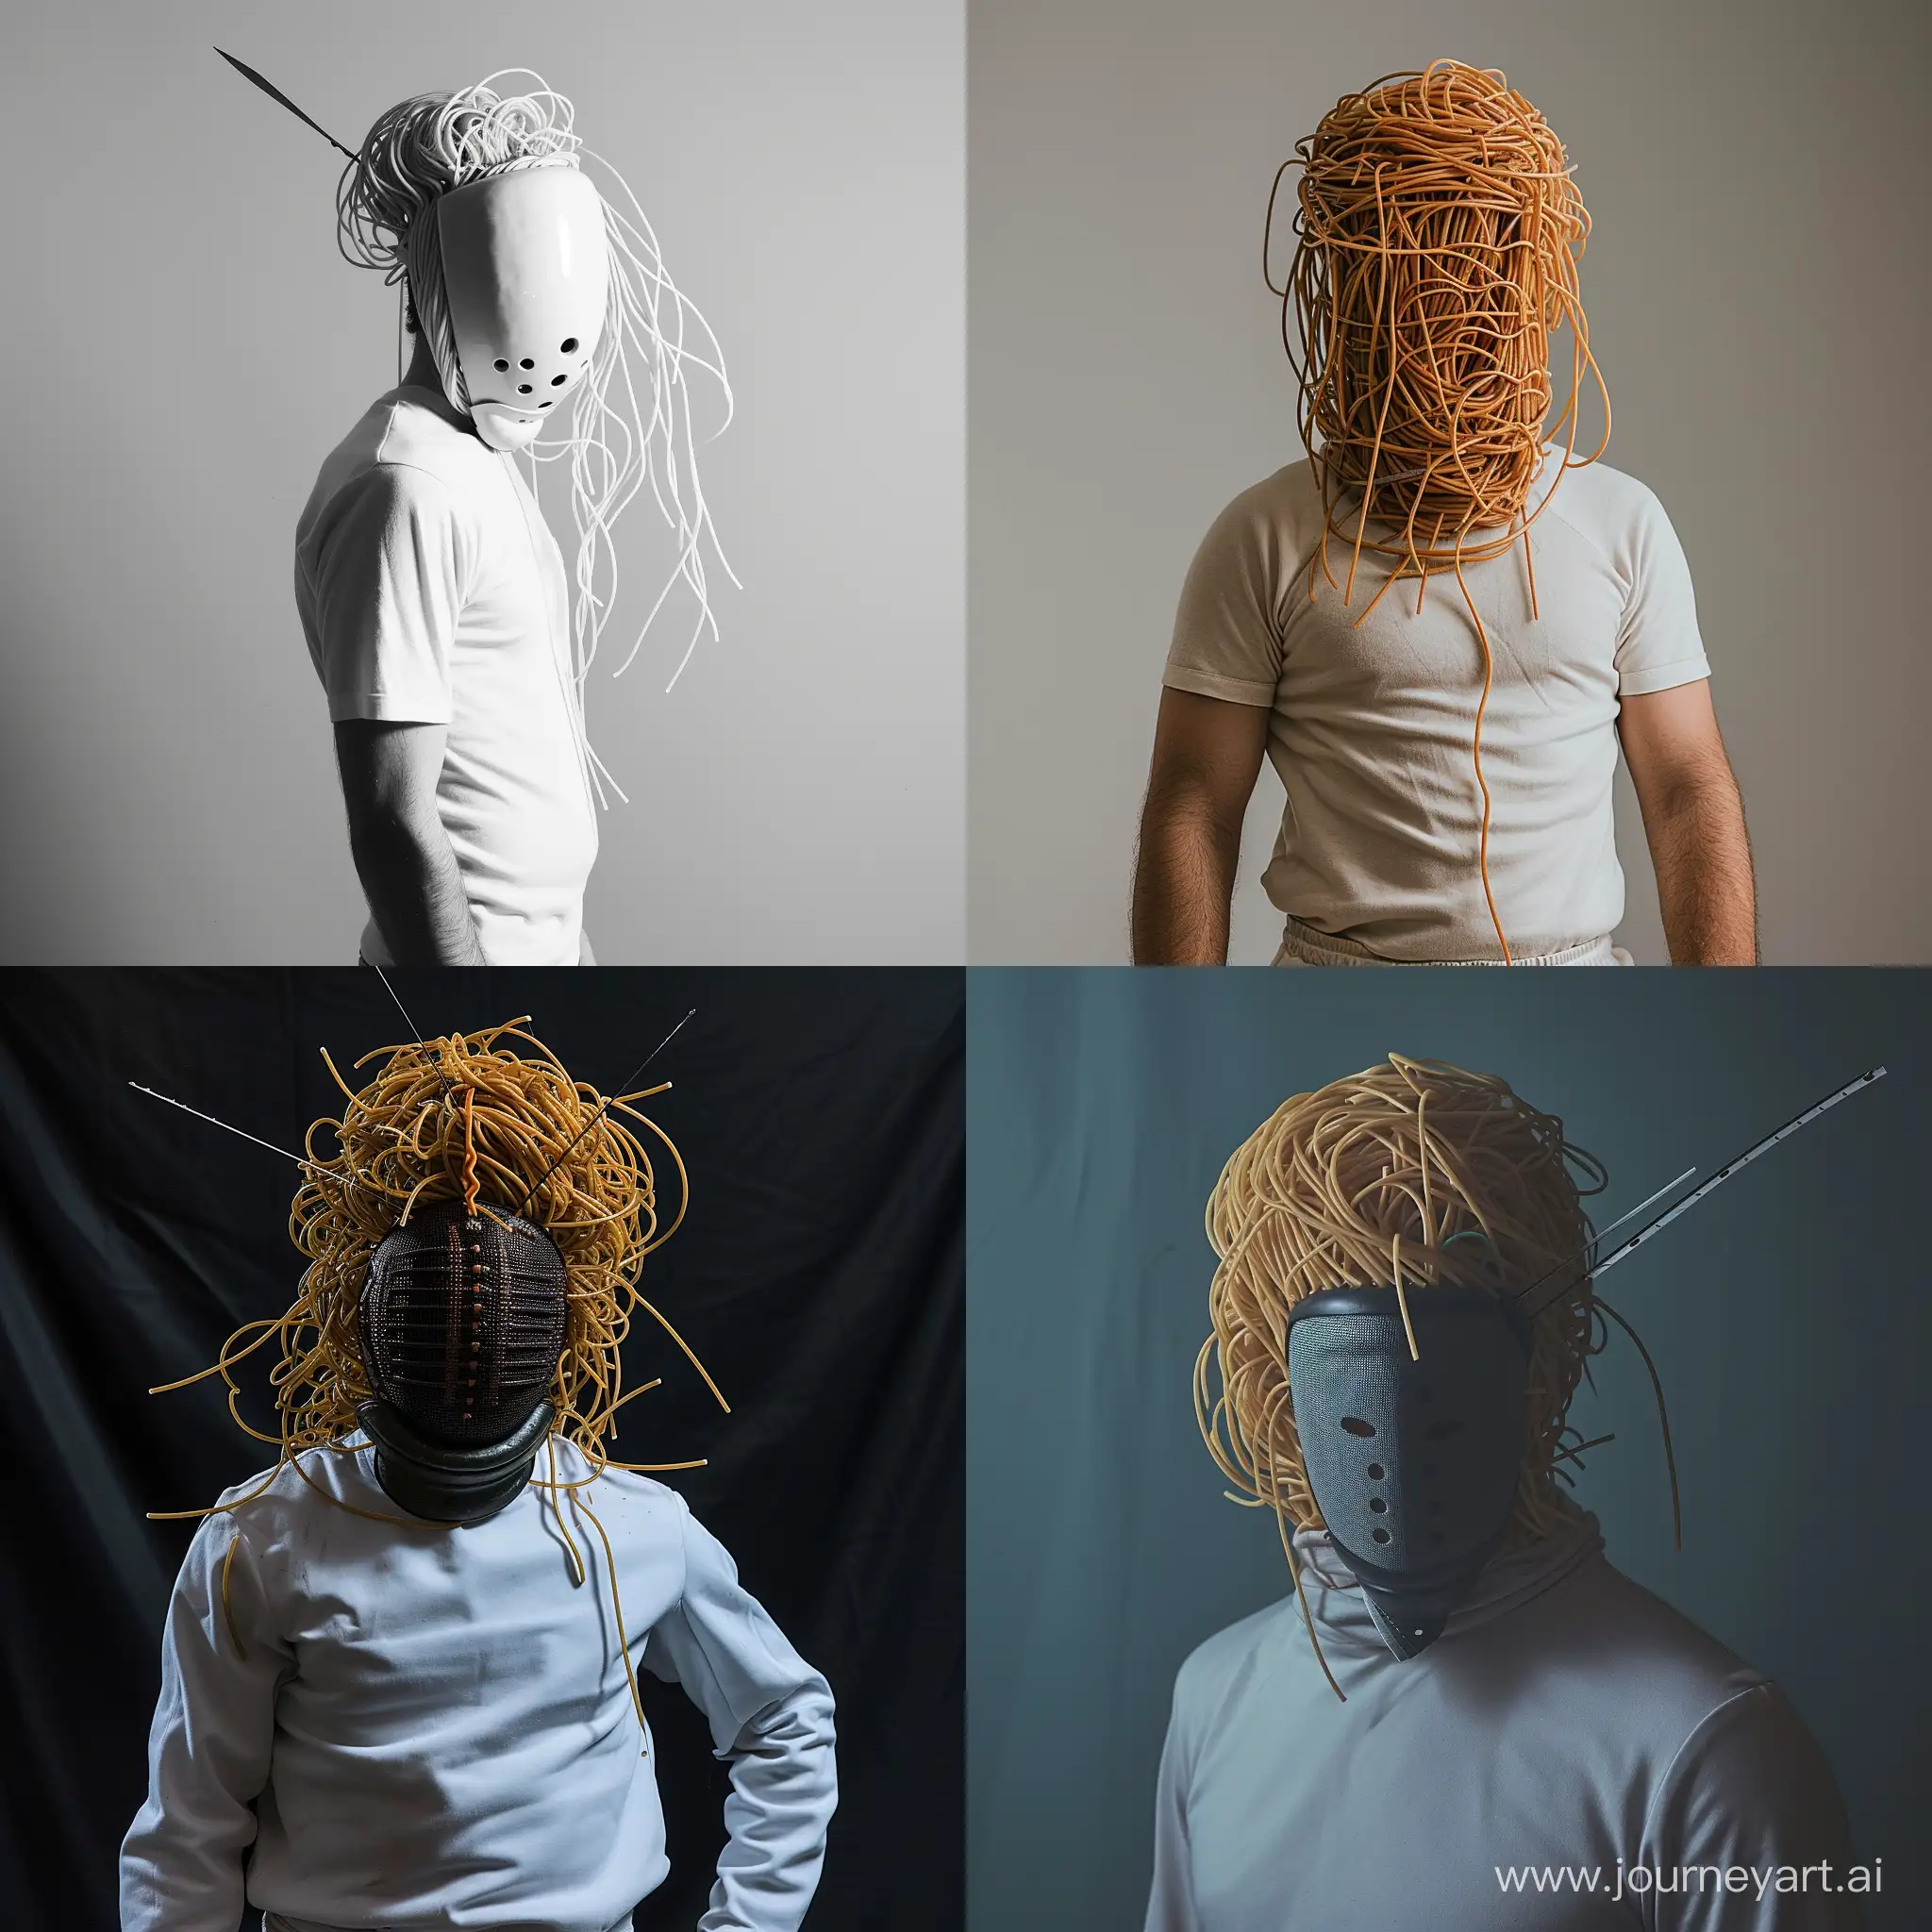 Quirky-Spaghetti-Fencing-Enthusiast-in-WaistHigh-Mask